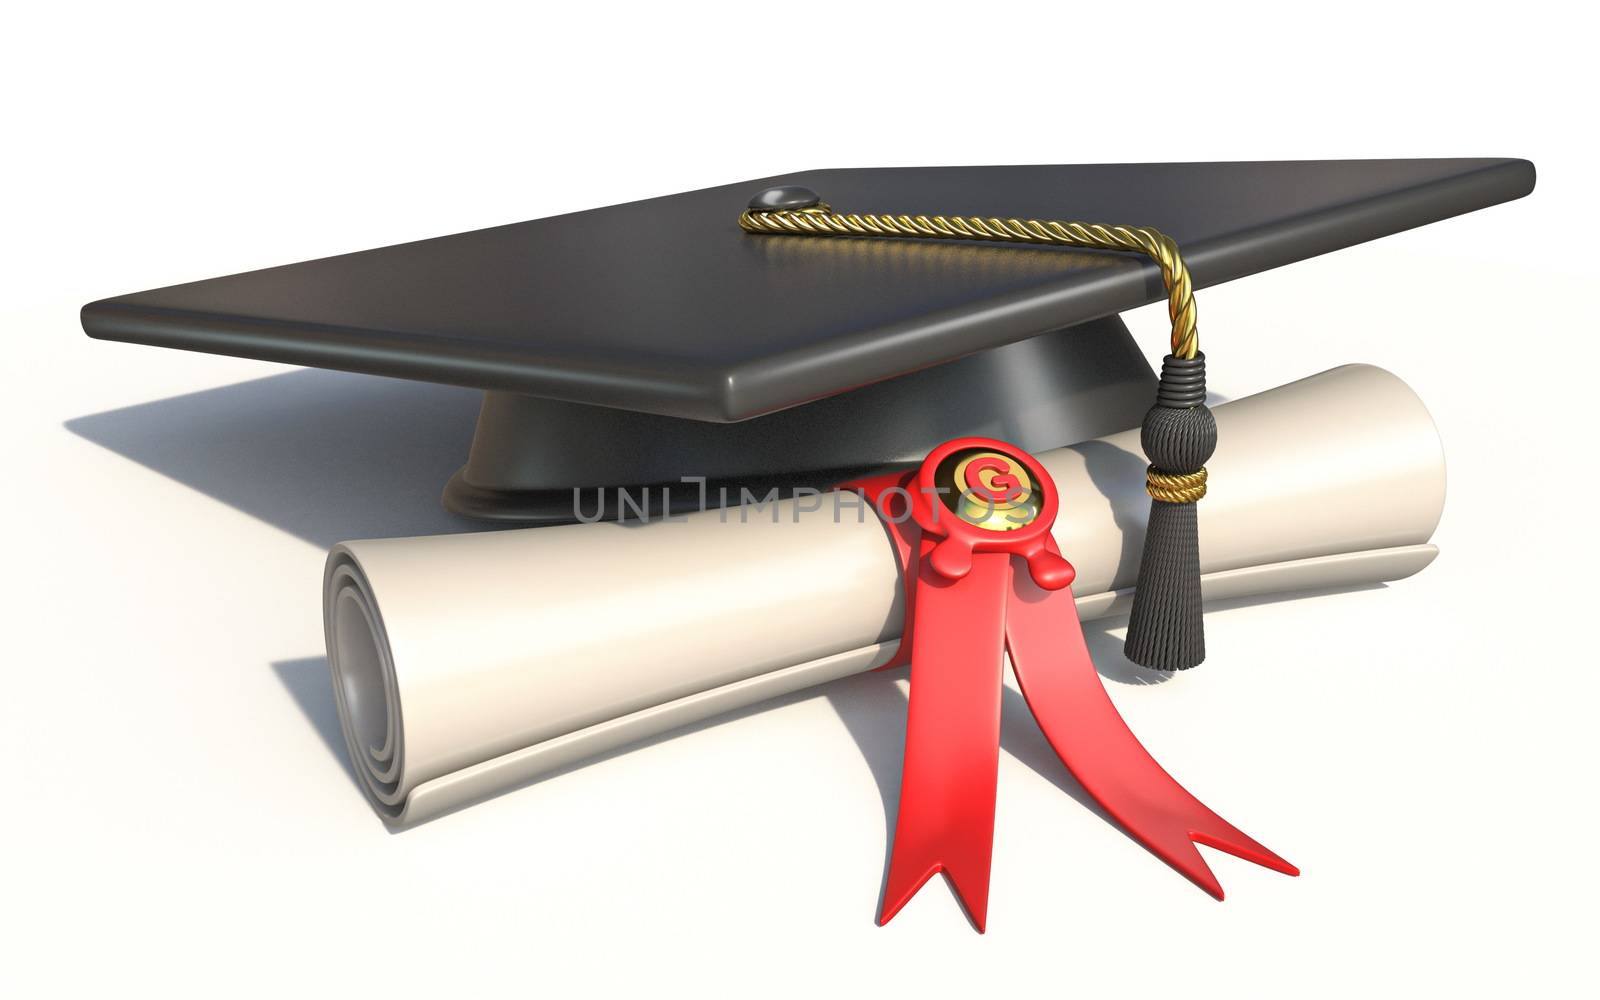 Graduation cap with diploma 3D render illustration isolated on white background